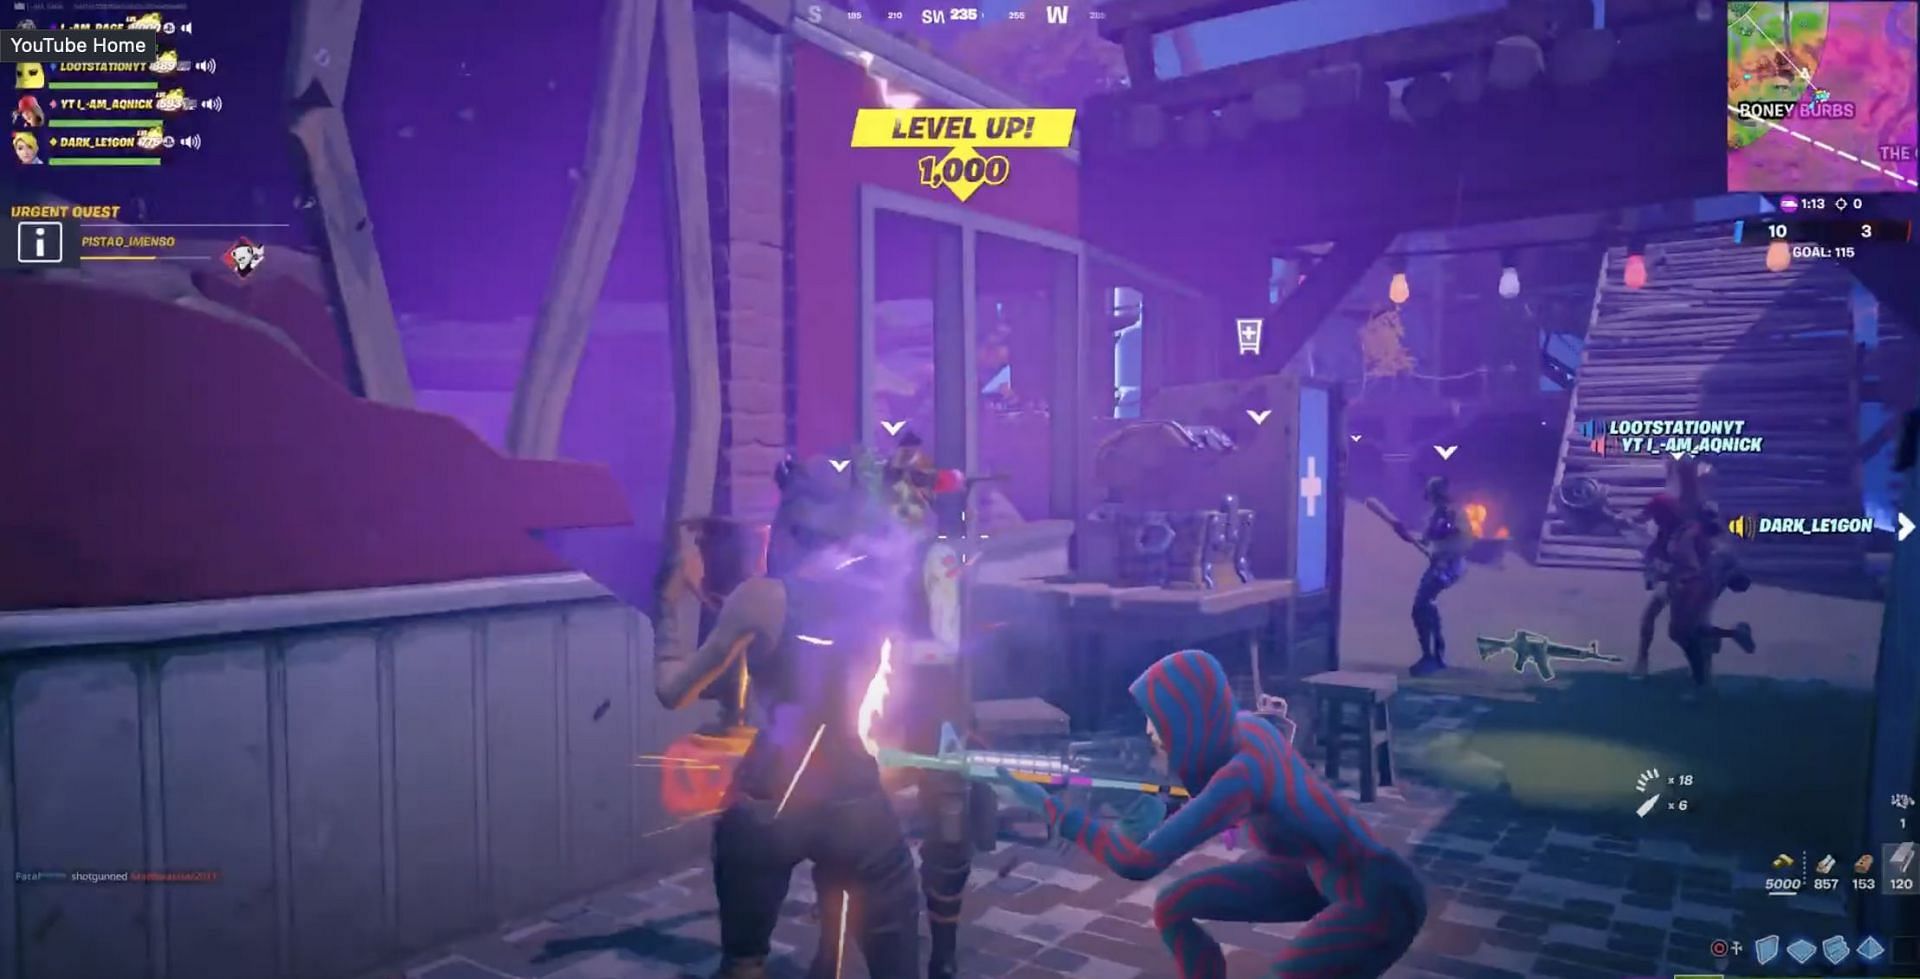 Fortnite player sets world record after he reaches Level 1000 (Image via RAGES REVENGE/YouTube)